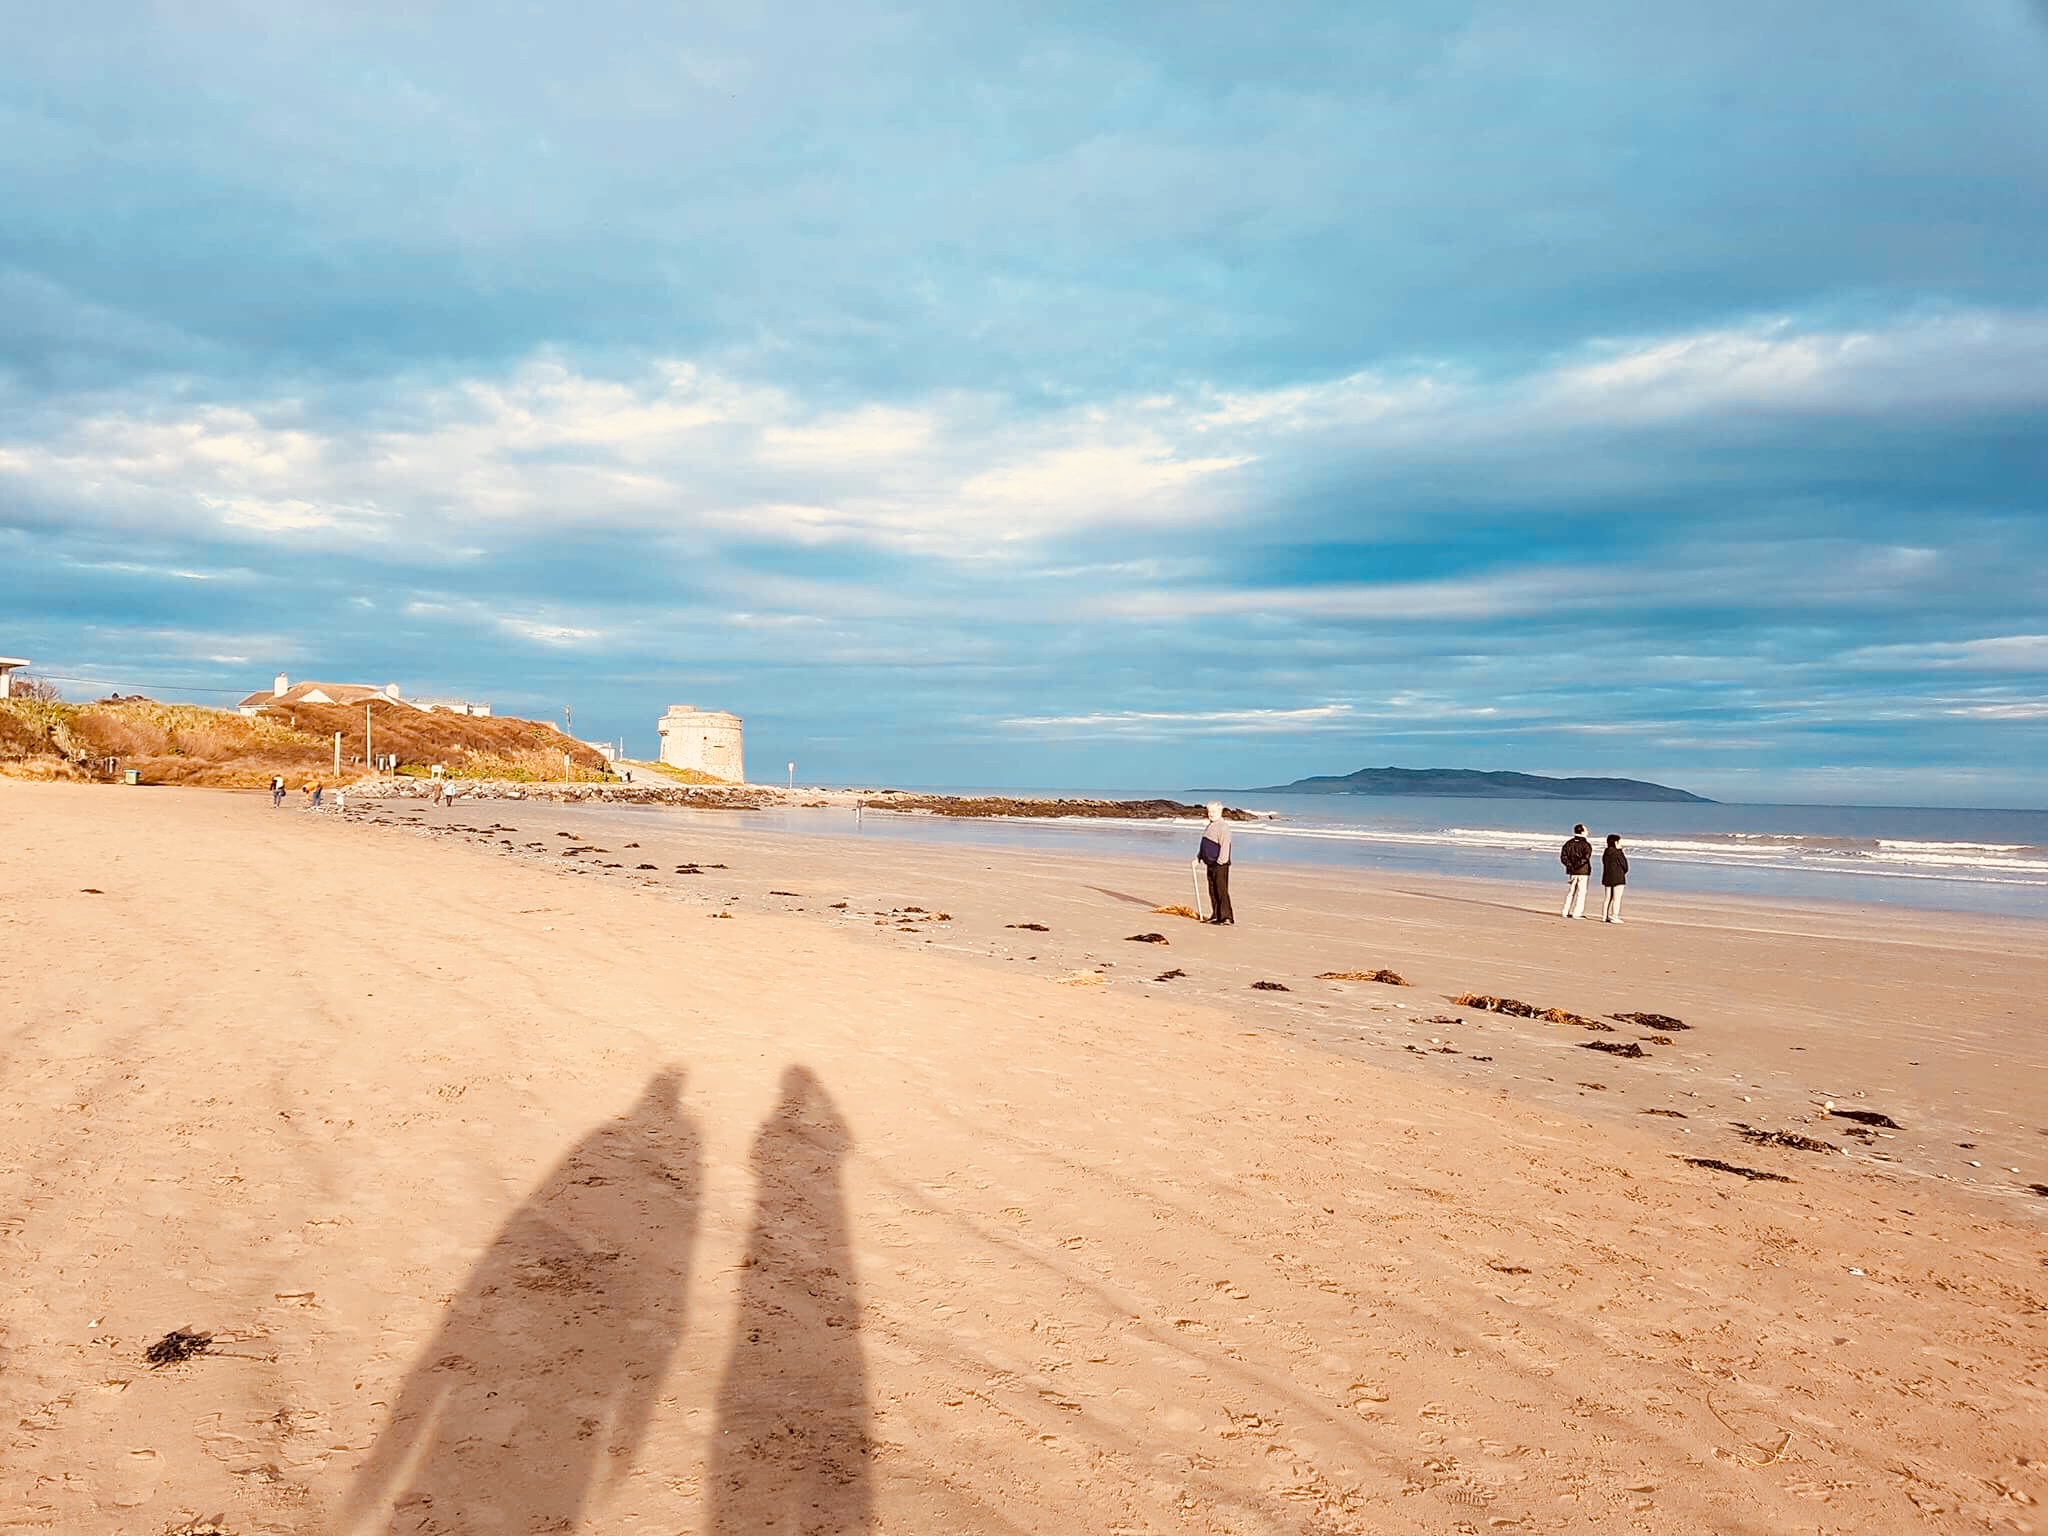 Day out - Traveller Reviews - Donabate Beach - Tripadvisor